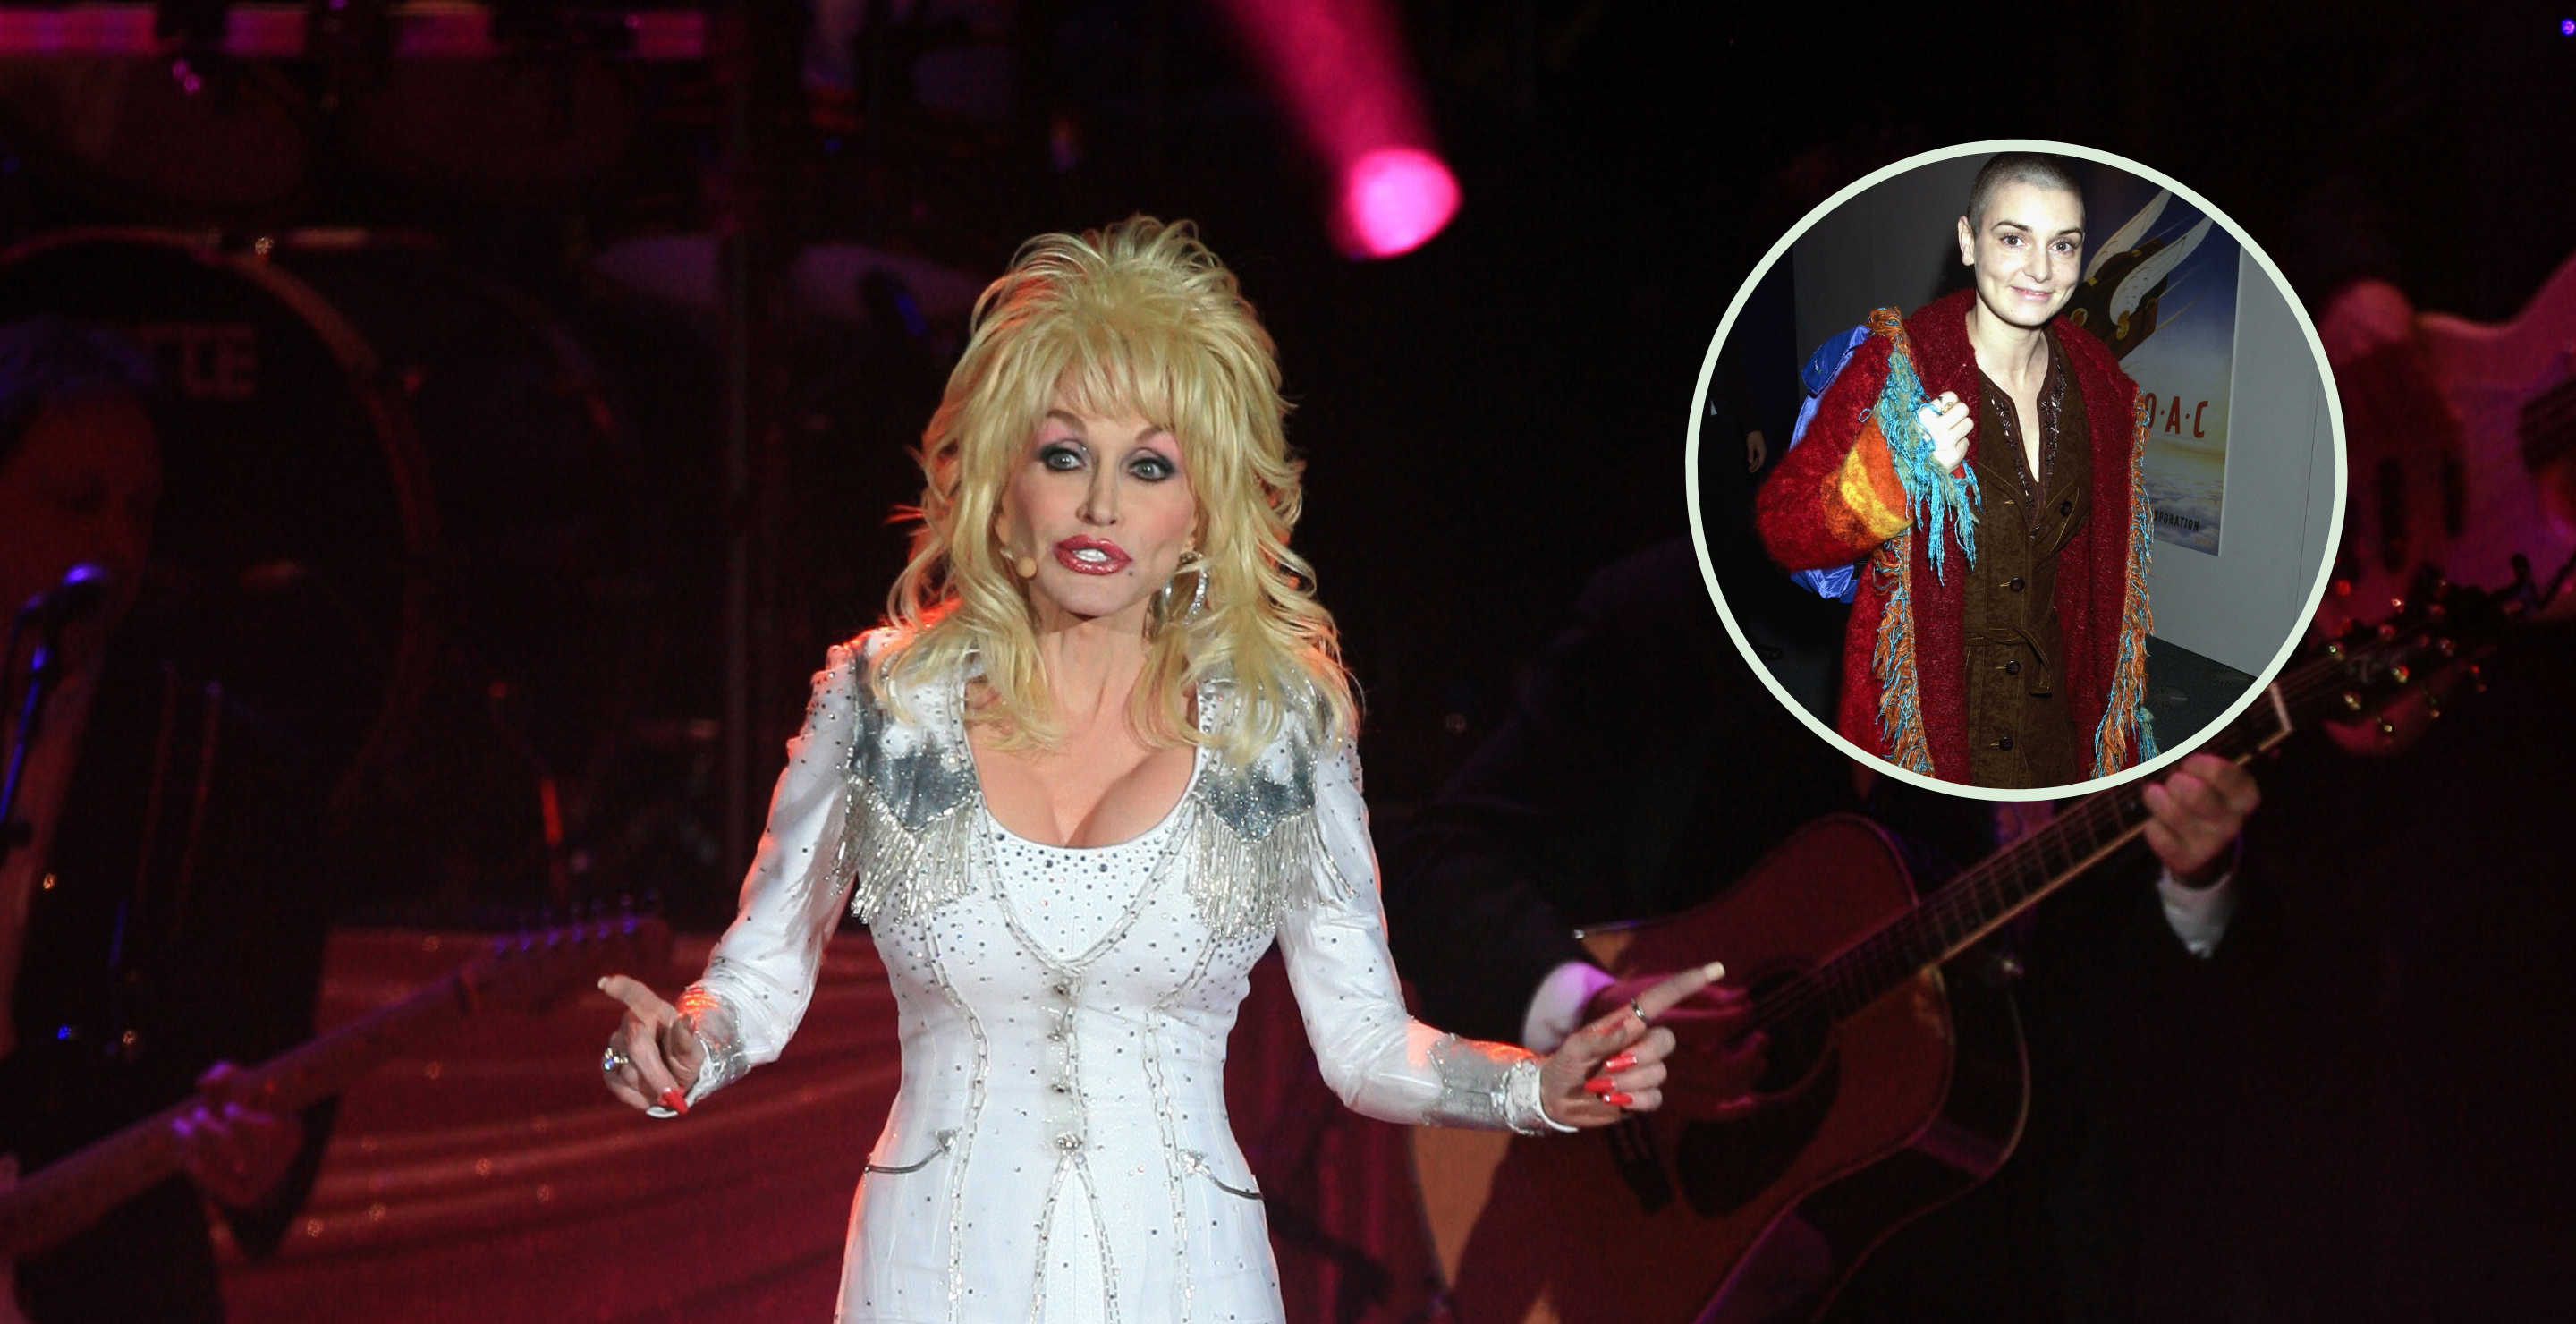 UNITED KINGDOM - MARCH 20: MANCHESTER EVENING NEWS ARENA Photo of Dolly Parton, Dolly Parton plays the MEN Arena., ........ Pic Jim Sharp (07974 356-333) and LONDON - FEBRUARY 6: Sinead O'Connor attends the Old Vic Theatre Fund Raising Gala Party at Old Billingsgate Market on February 6, 2003 in London.